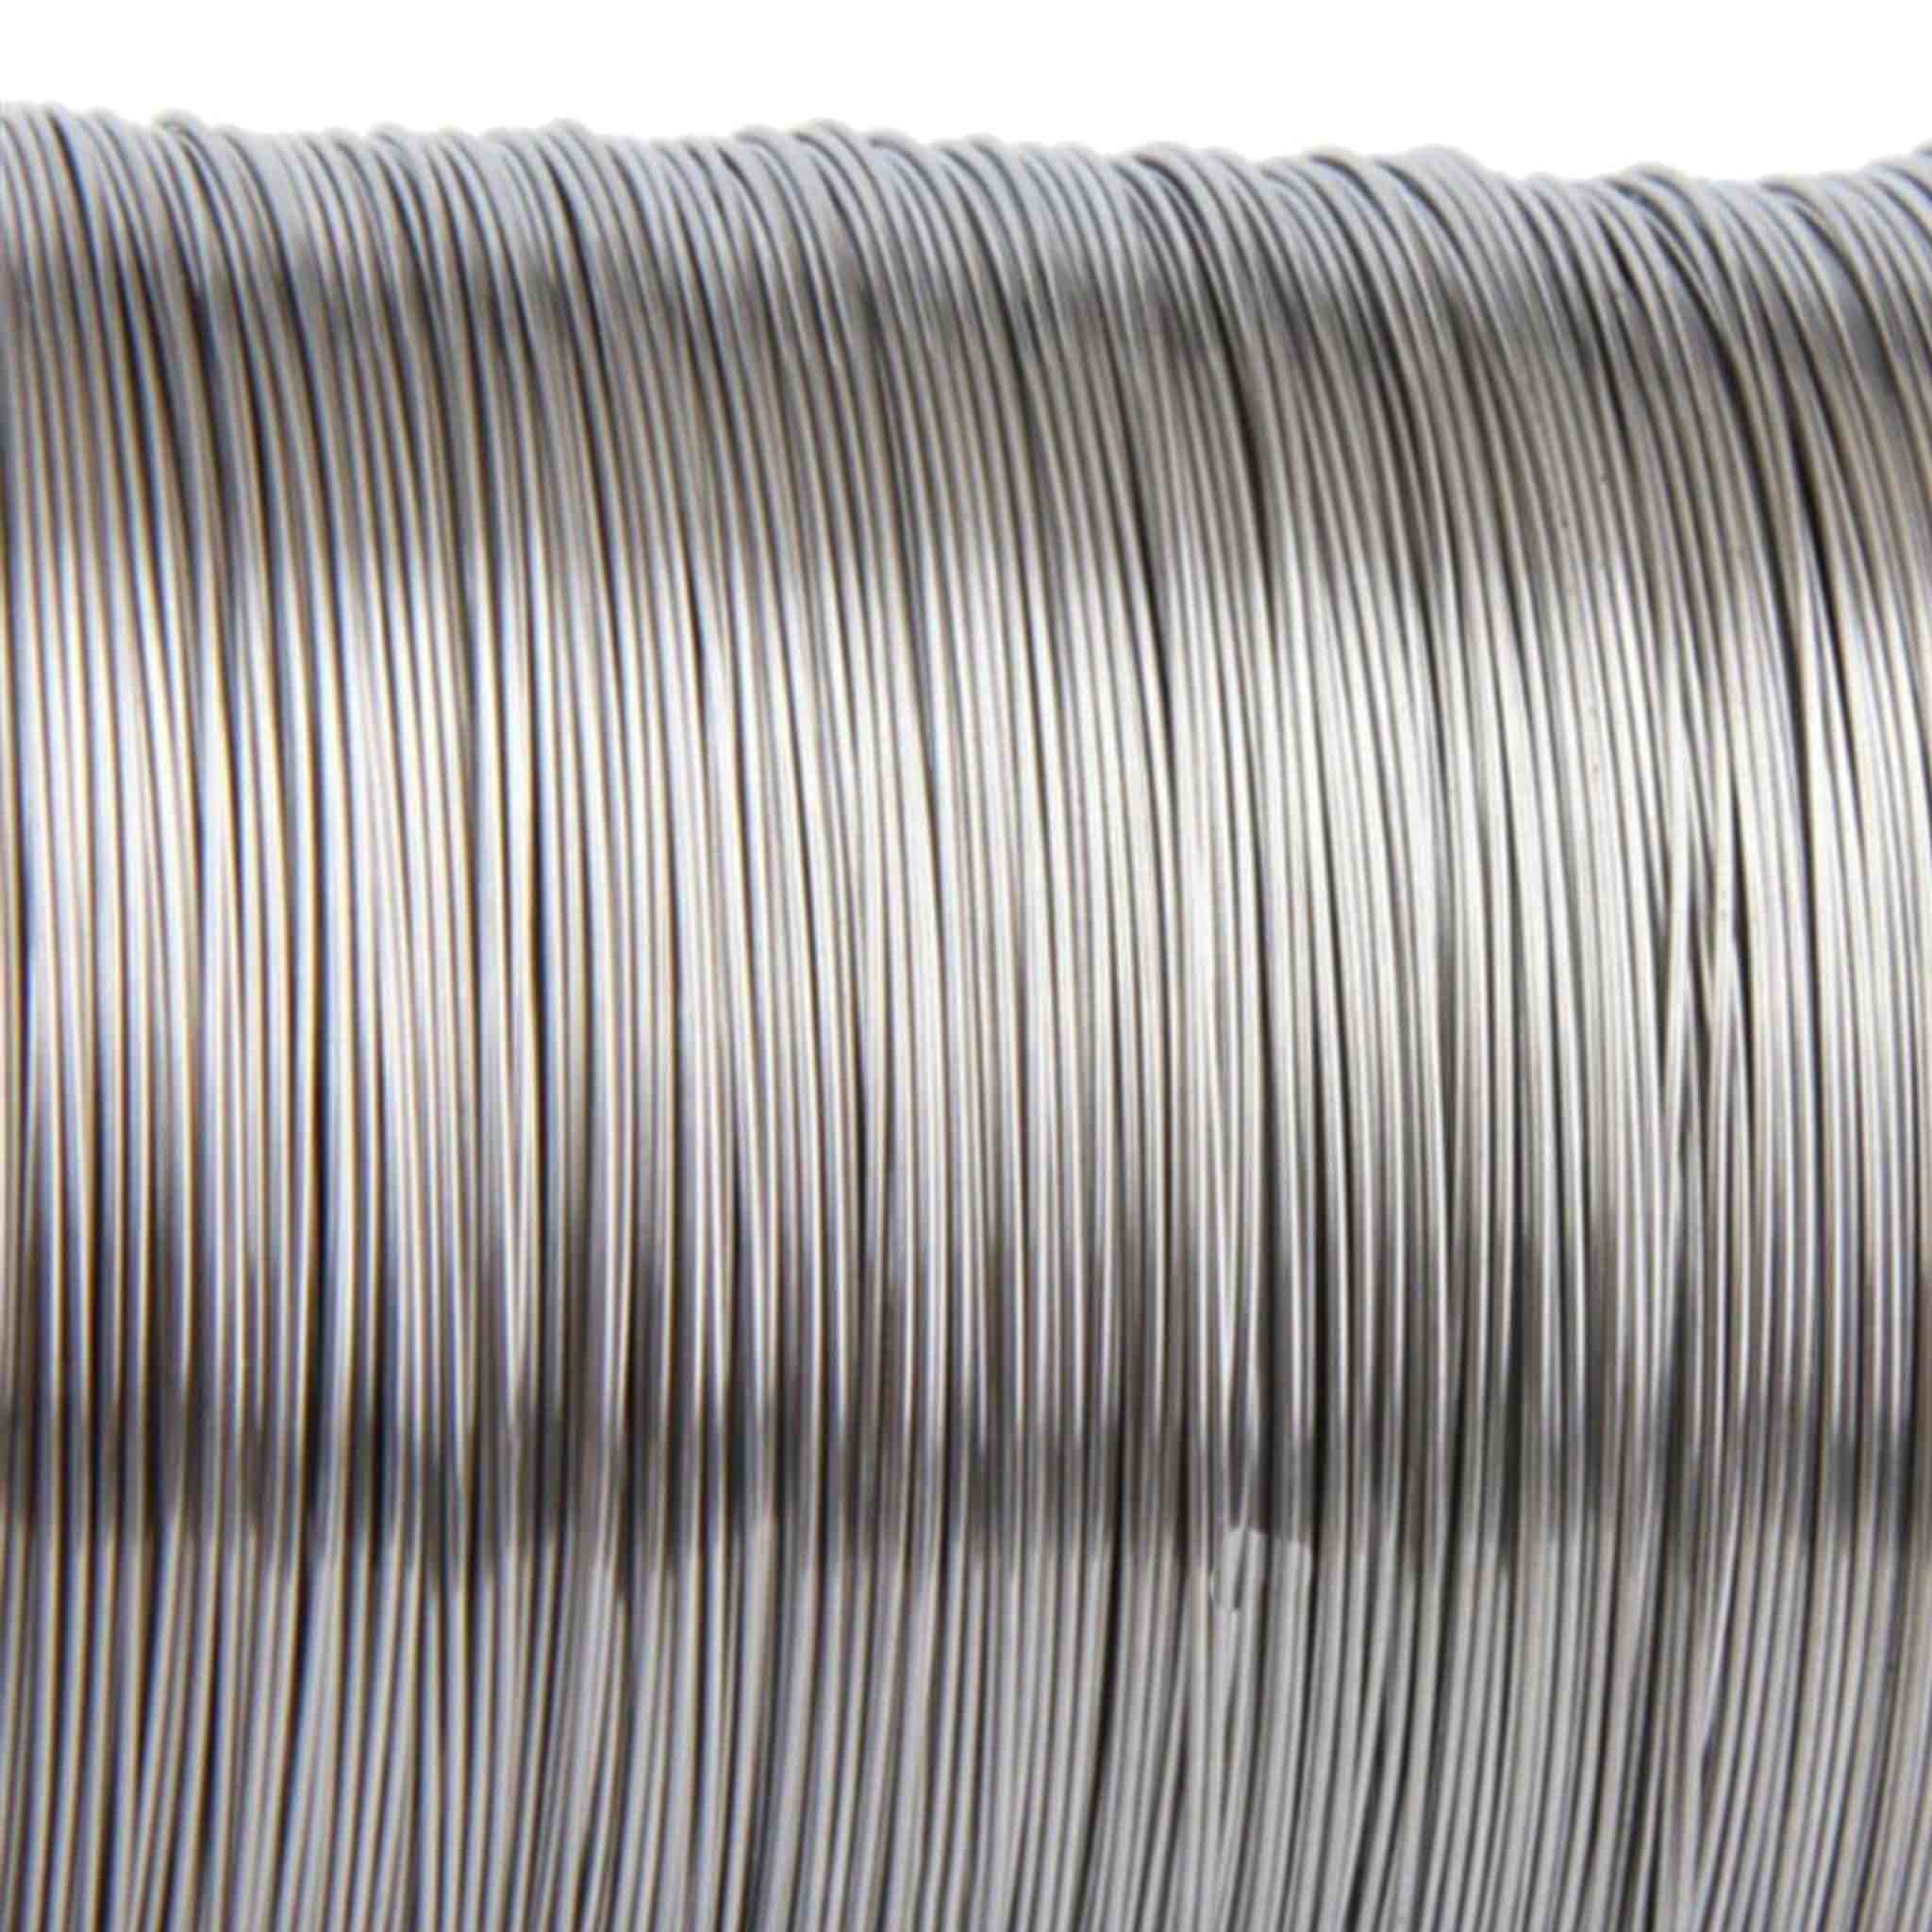 Stainless Steel Wire for Wiring Beehive Frames 500g and 1kg - Accessories collection by Buzzbee Beekeeping Supplies